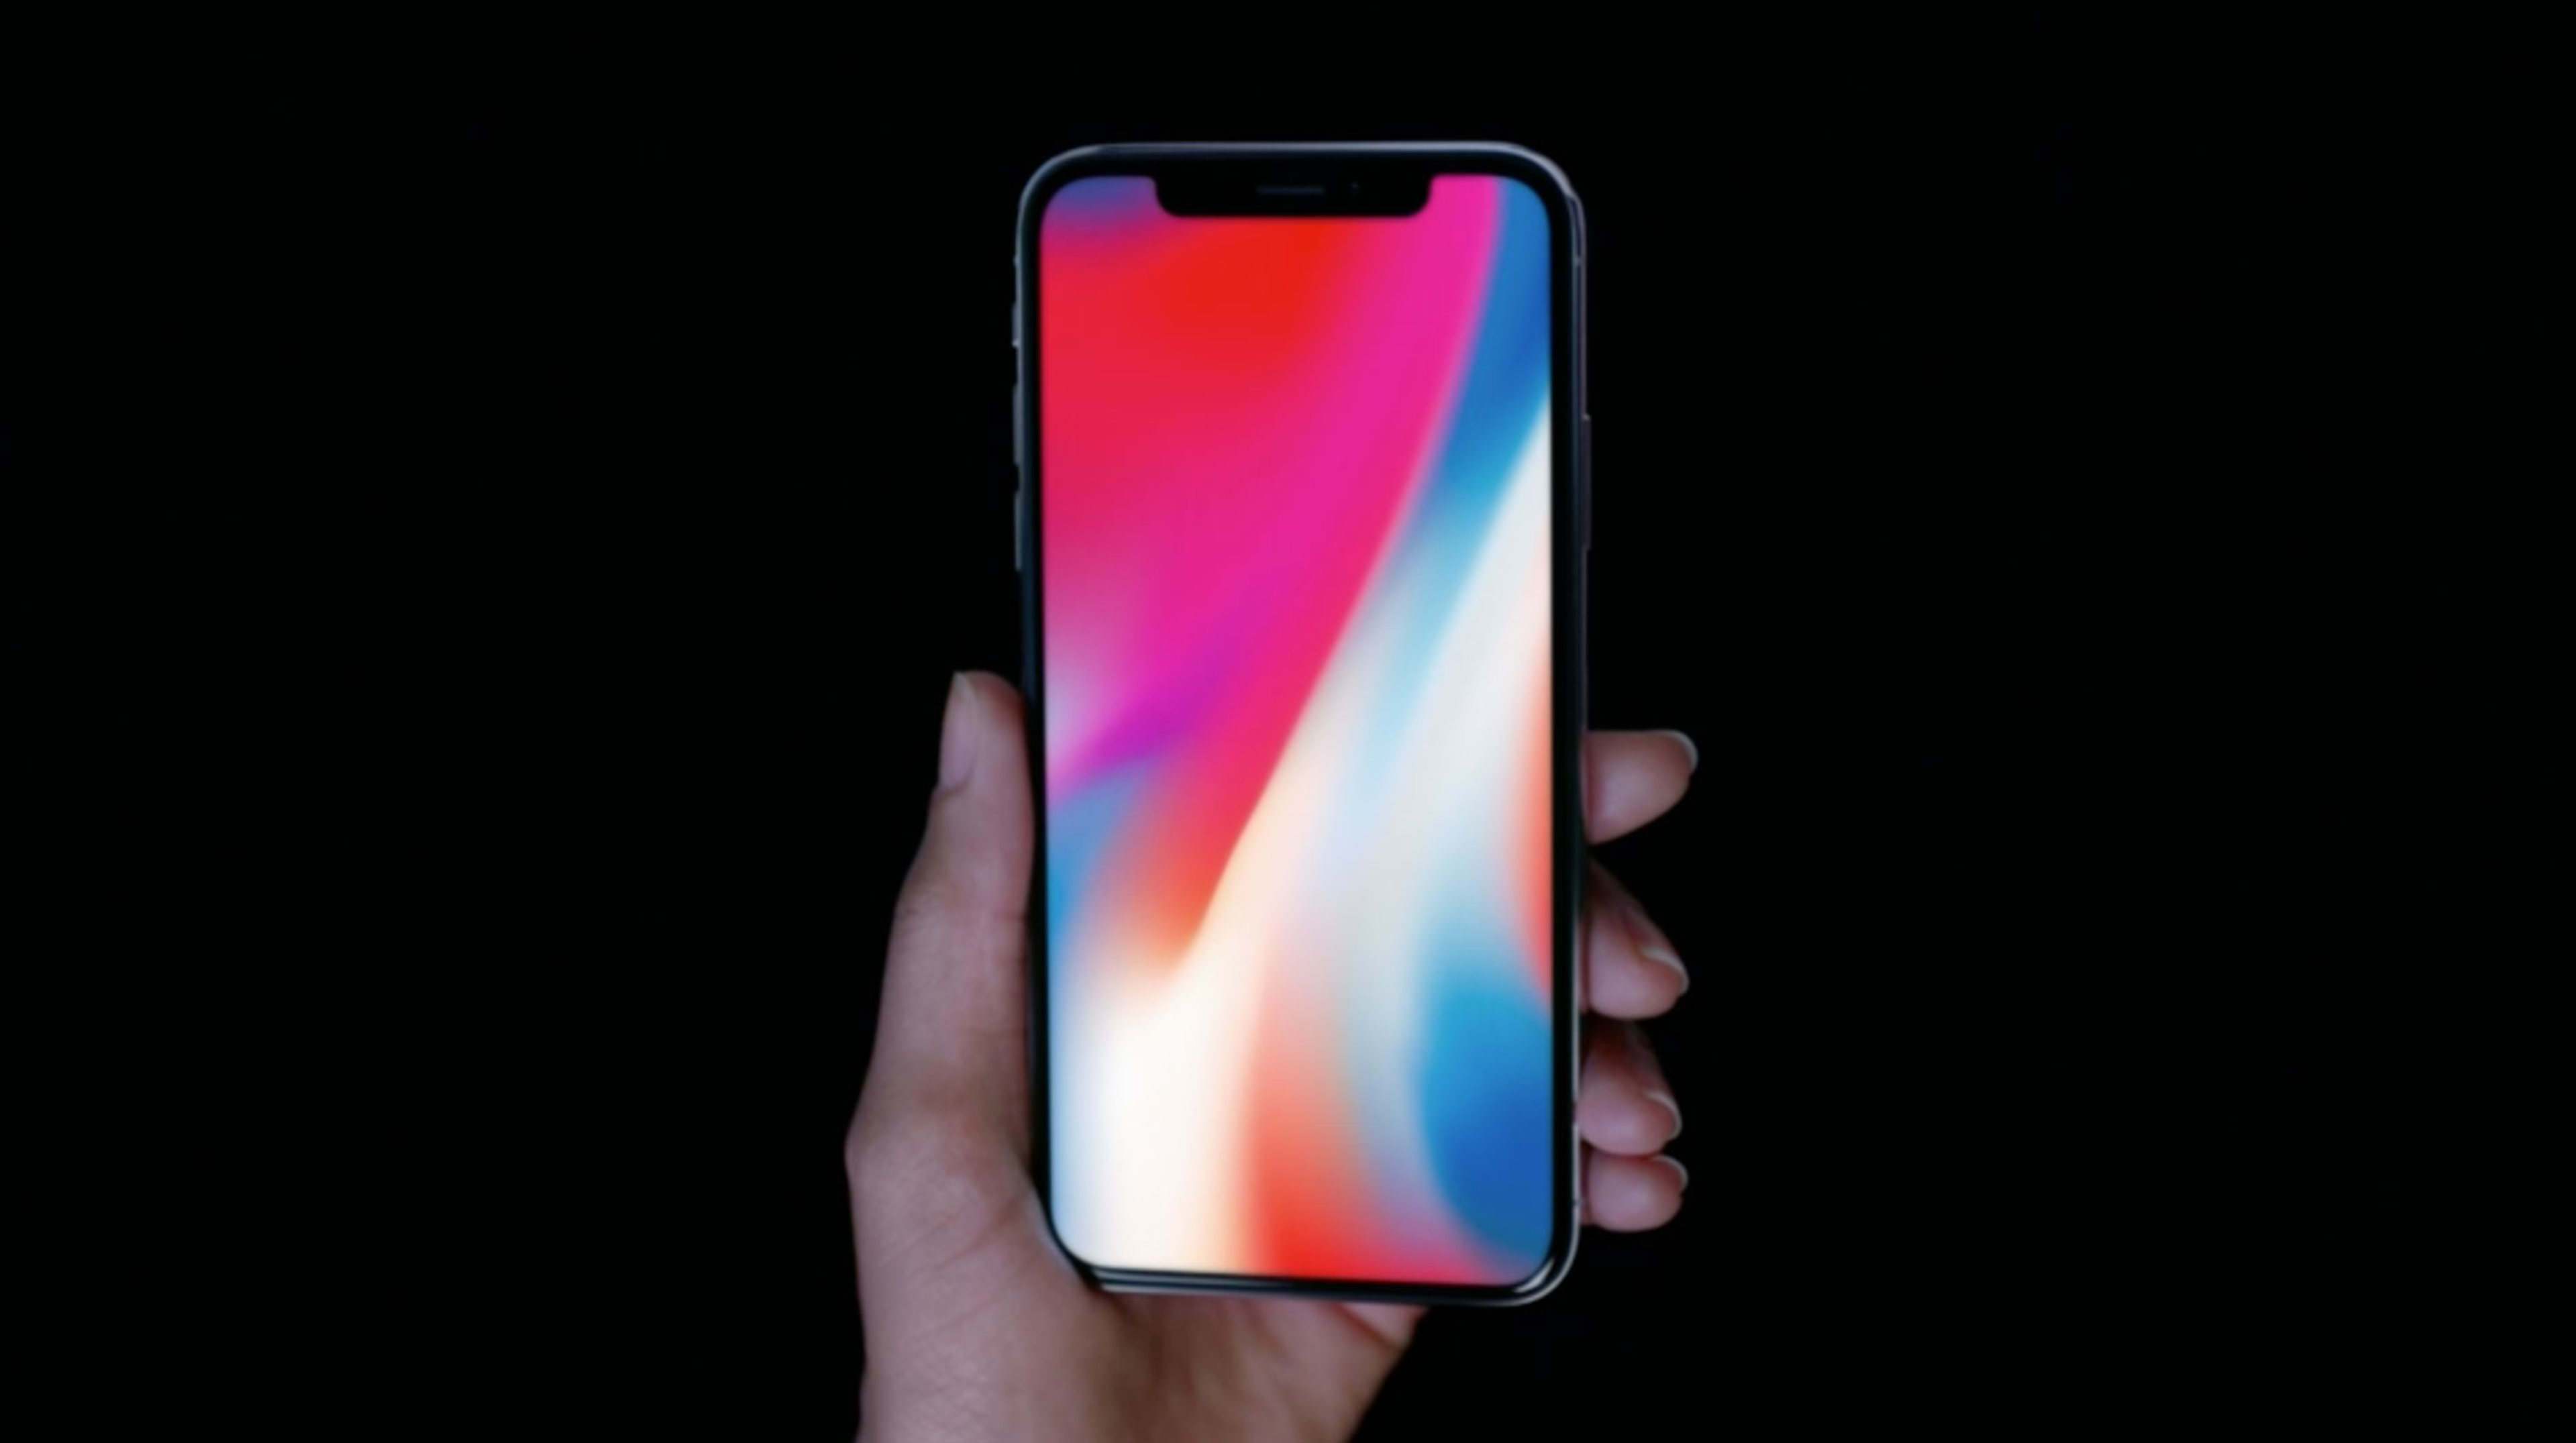 Apple iPhone X Has A Huge Screen, Facial Recognition, And AR Powers